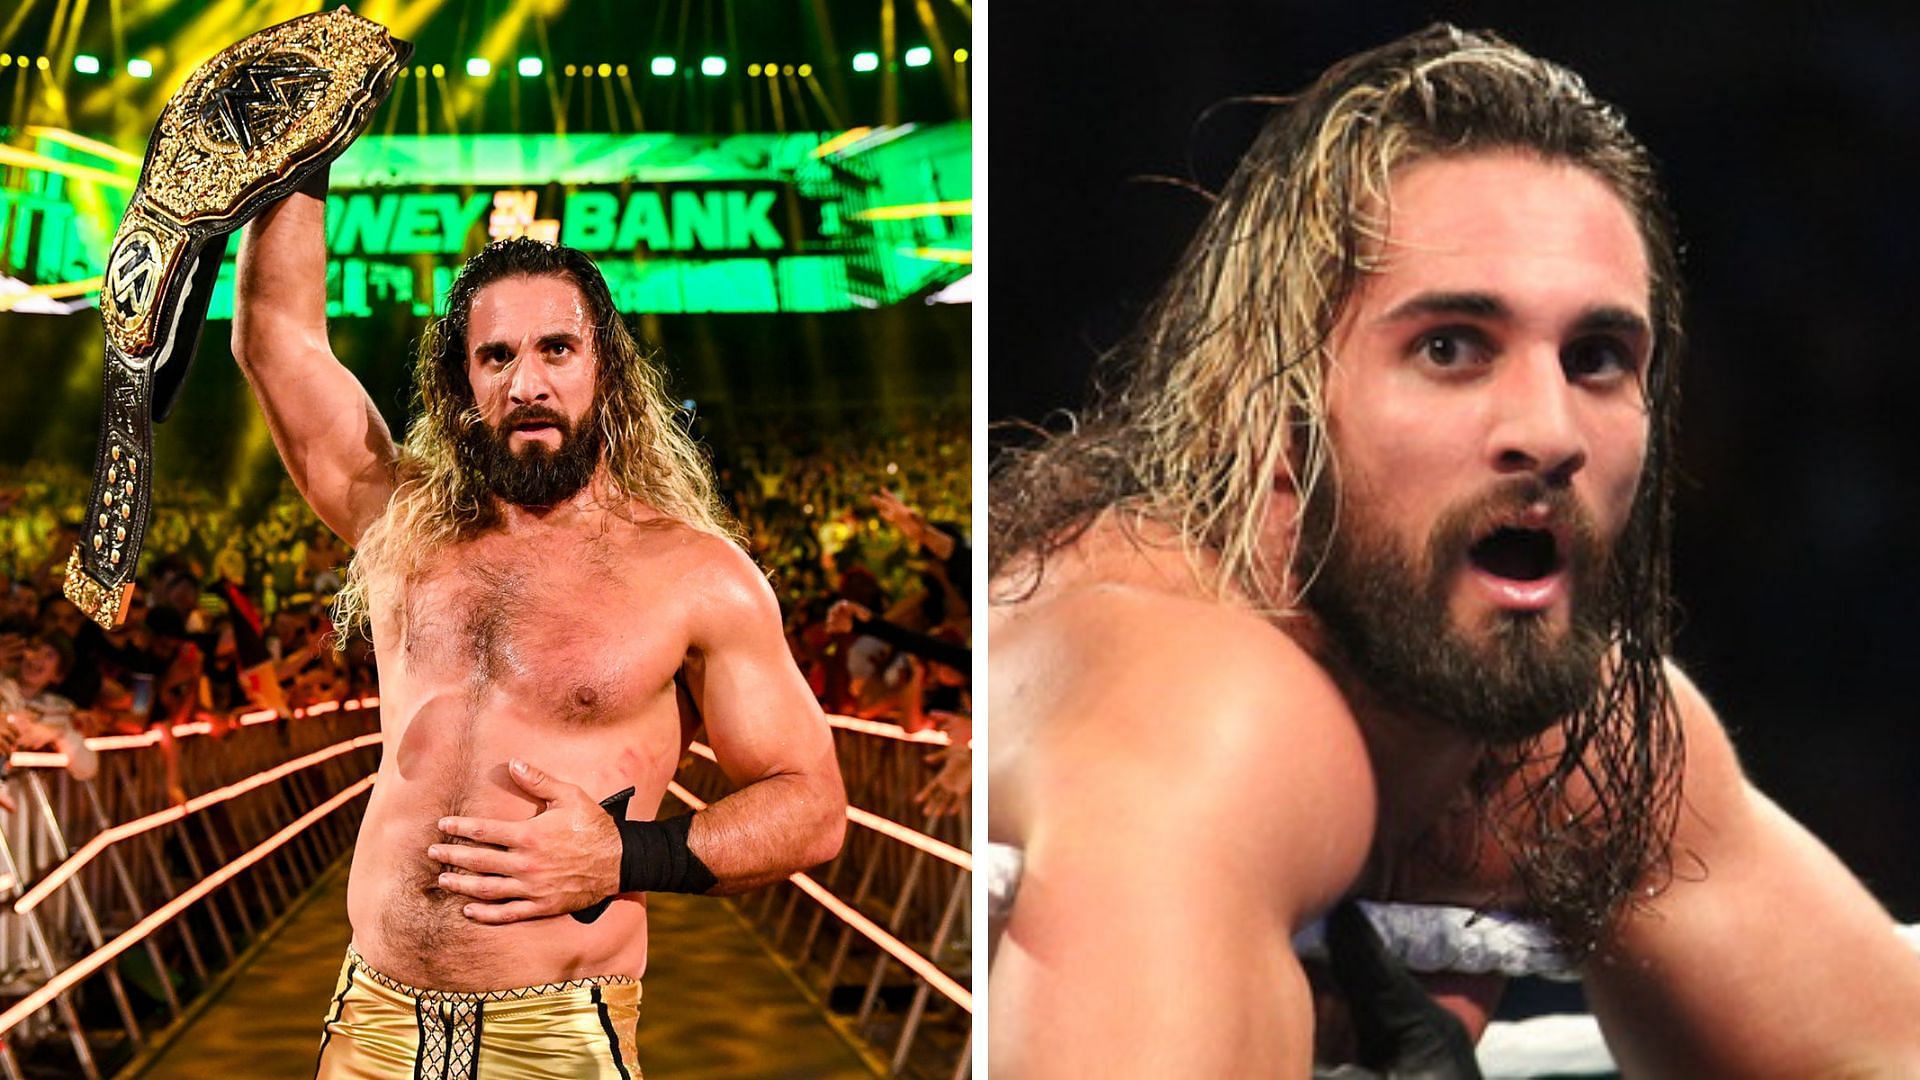 Seth Rollins retained his title at WWE Money in the Bank